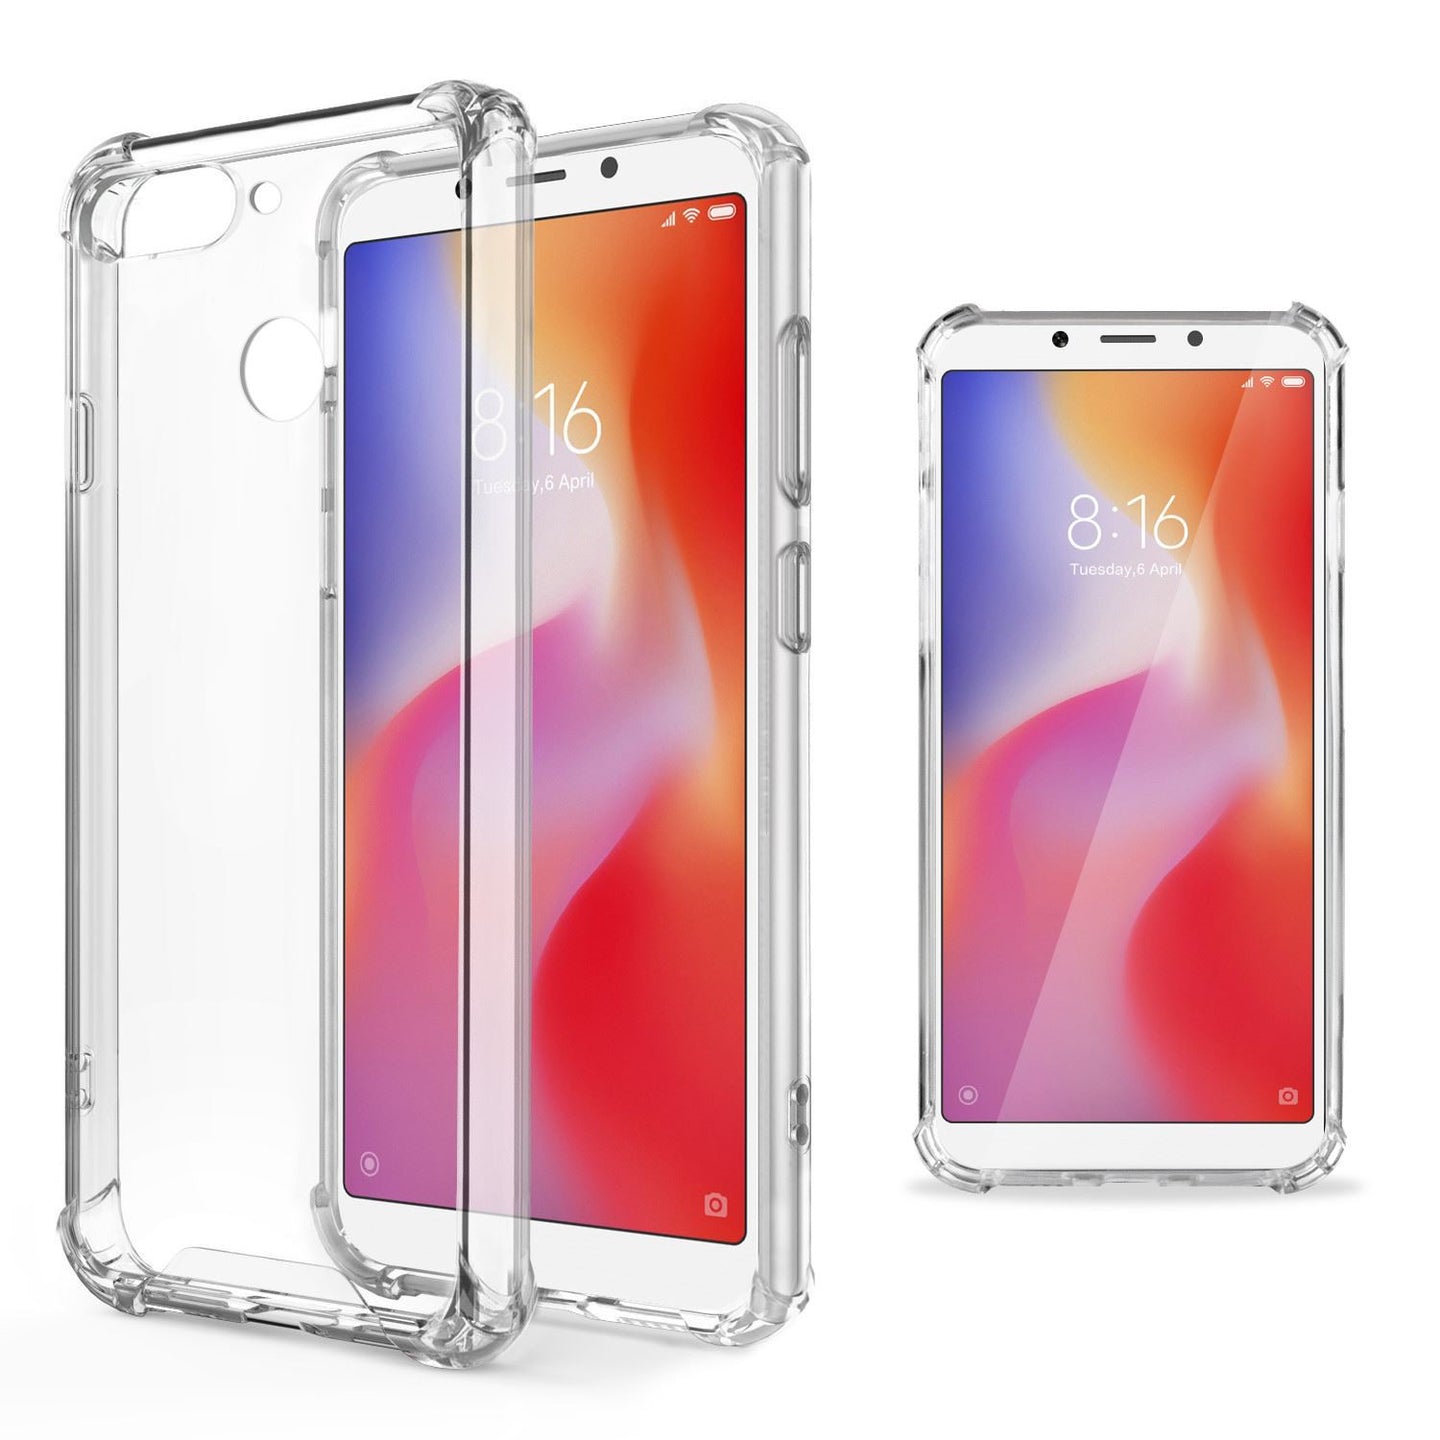 Moozy Shock Proof Silicone Case for Xiaomi Redmi 6 - Transparent Crystal Clear Phone Case Soft TPU Cover